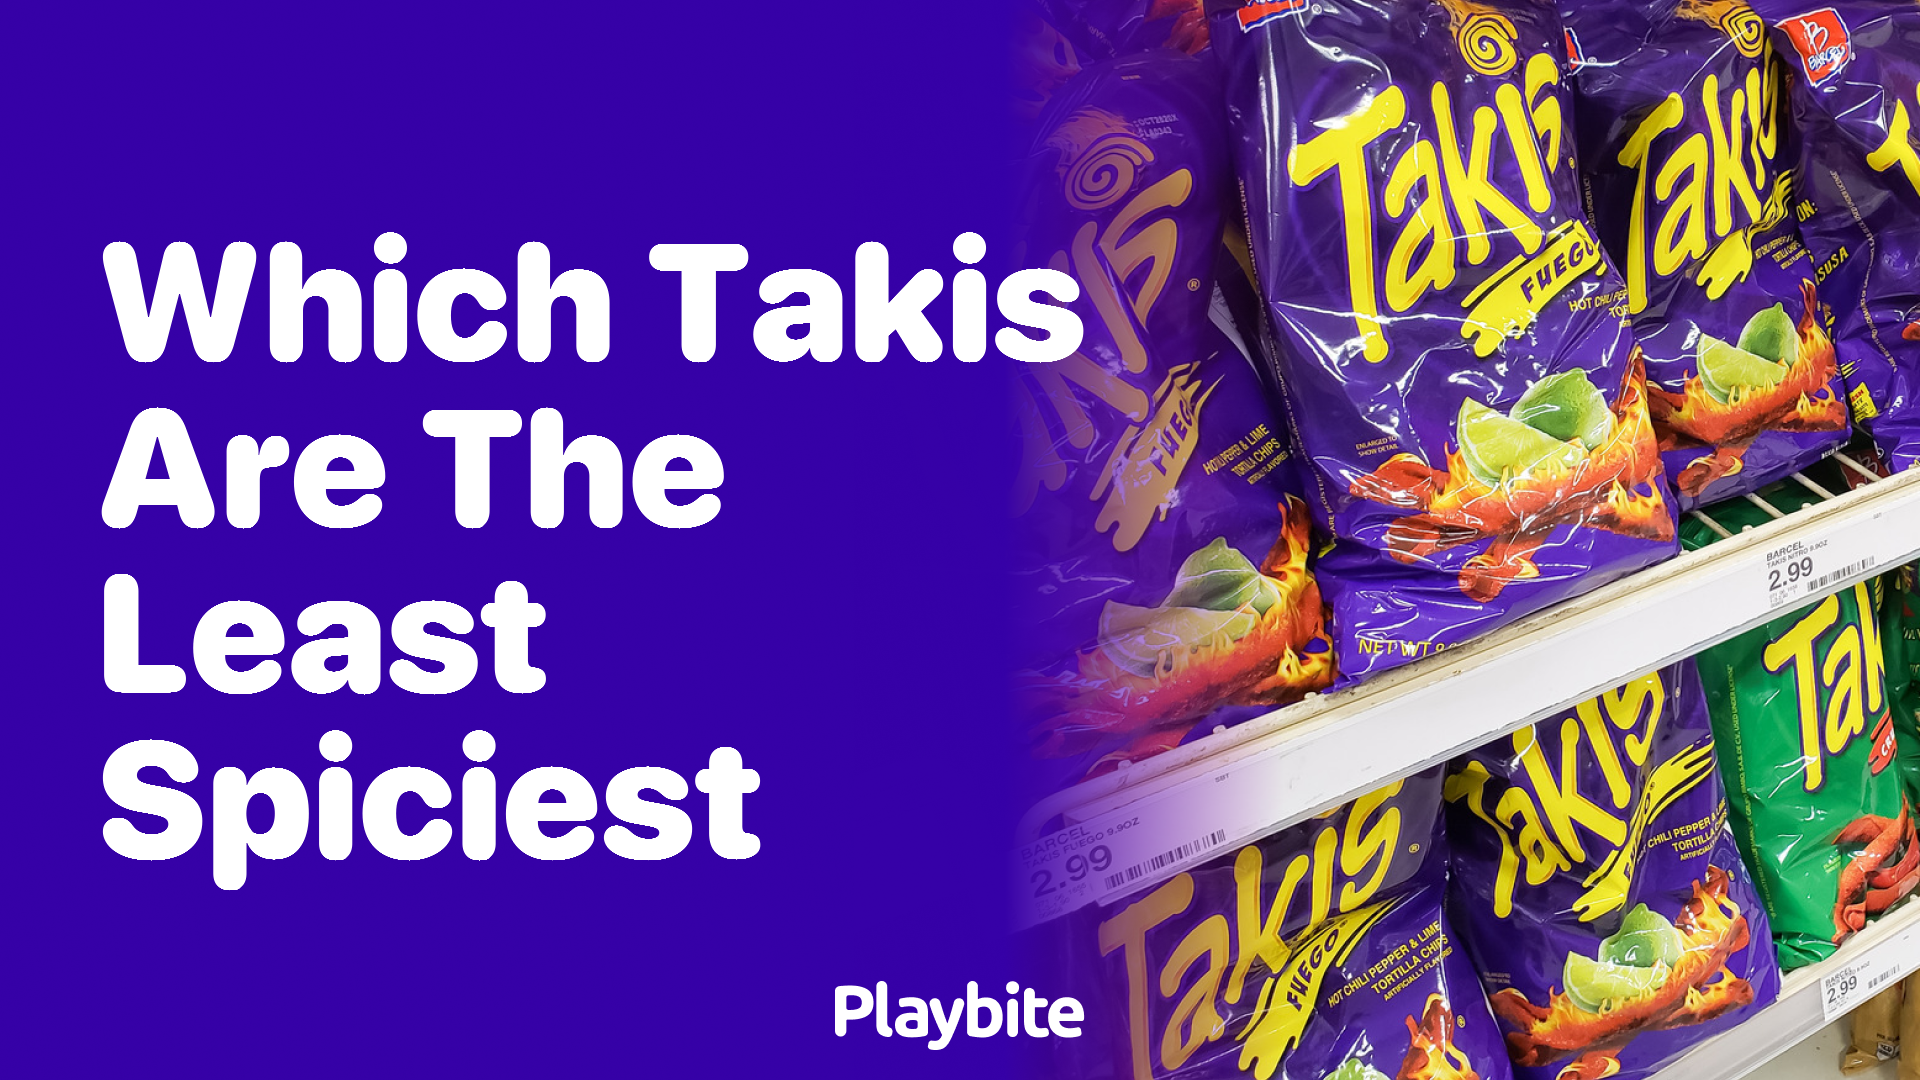 Discover Which Takis Are the Least Spiciest for Your Snacking Pleasure